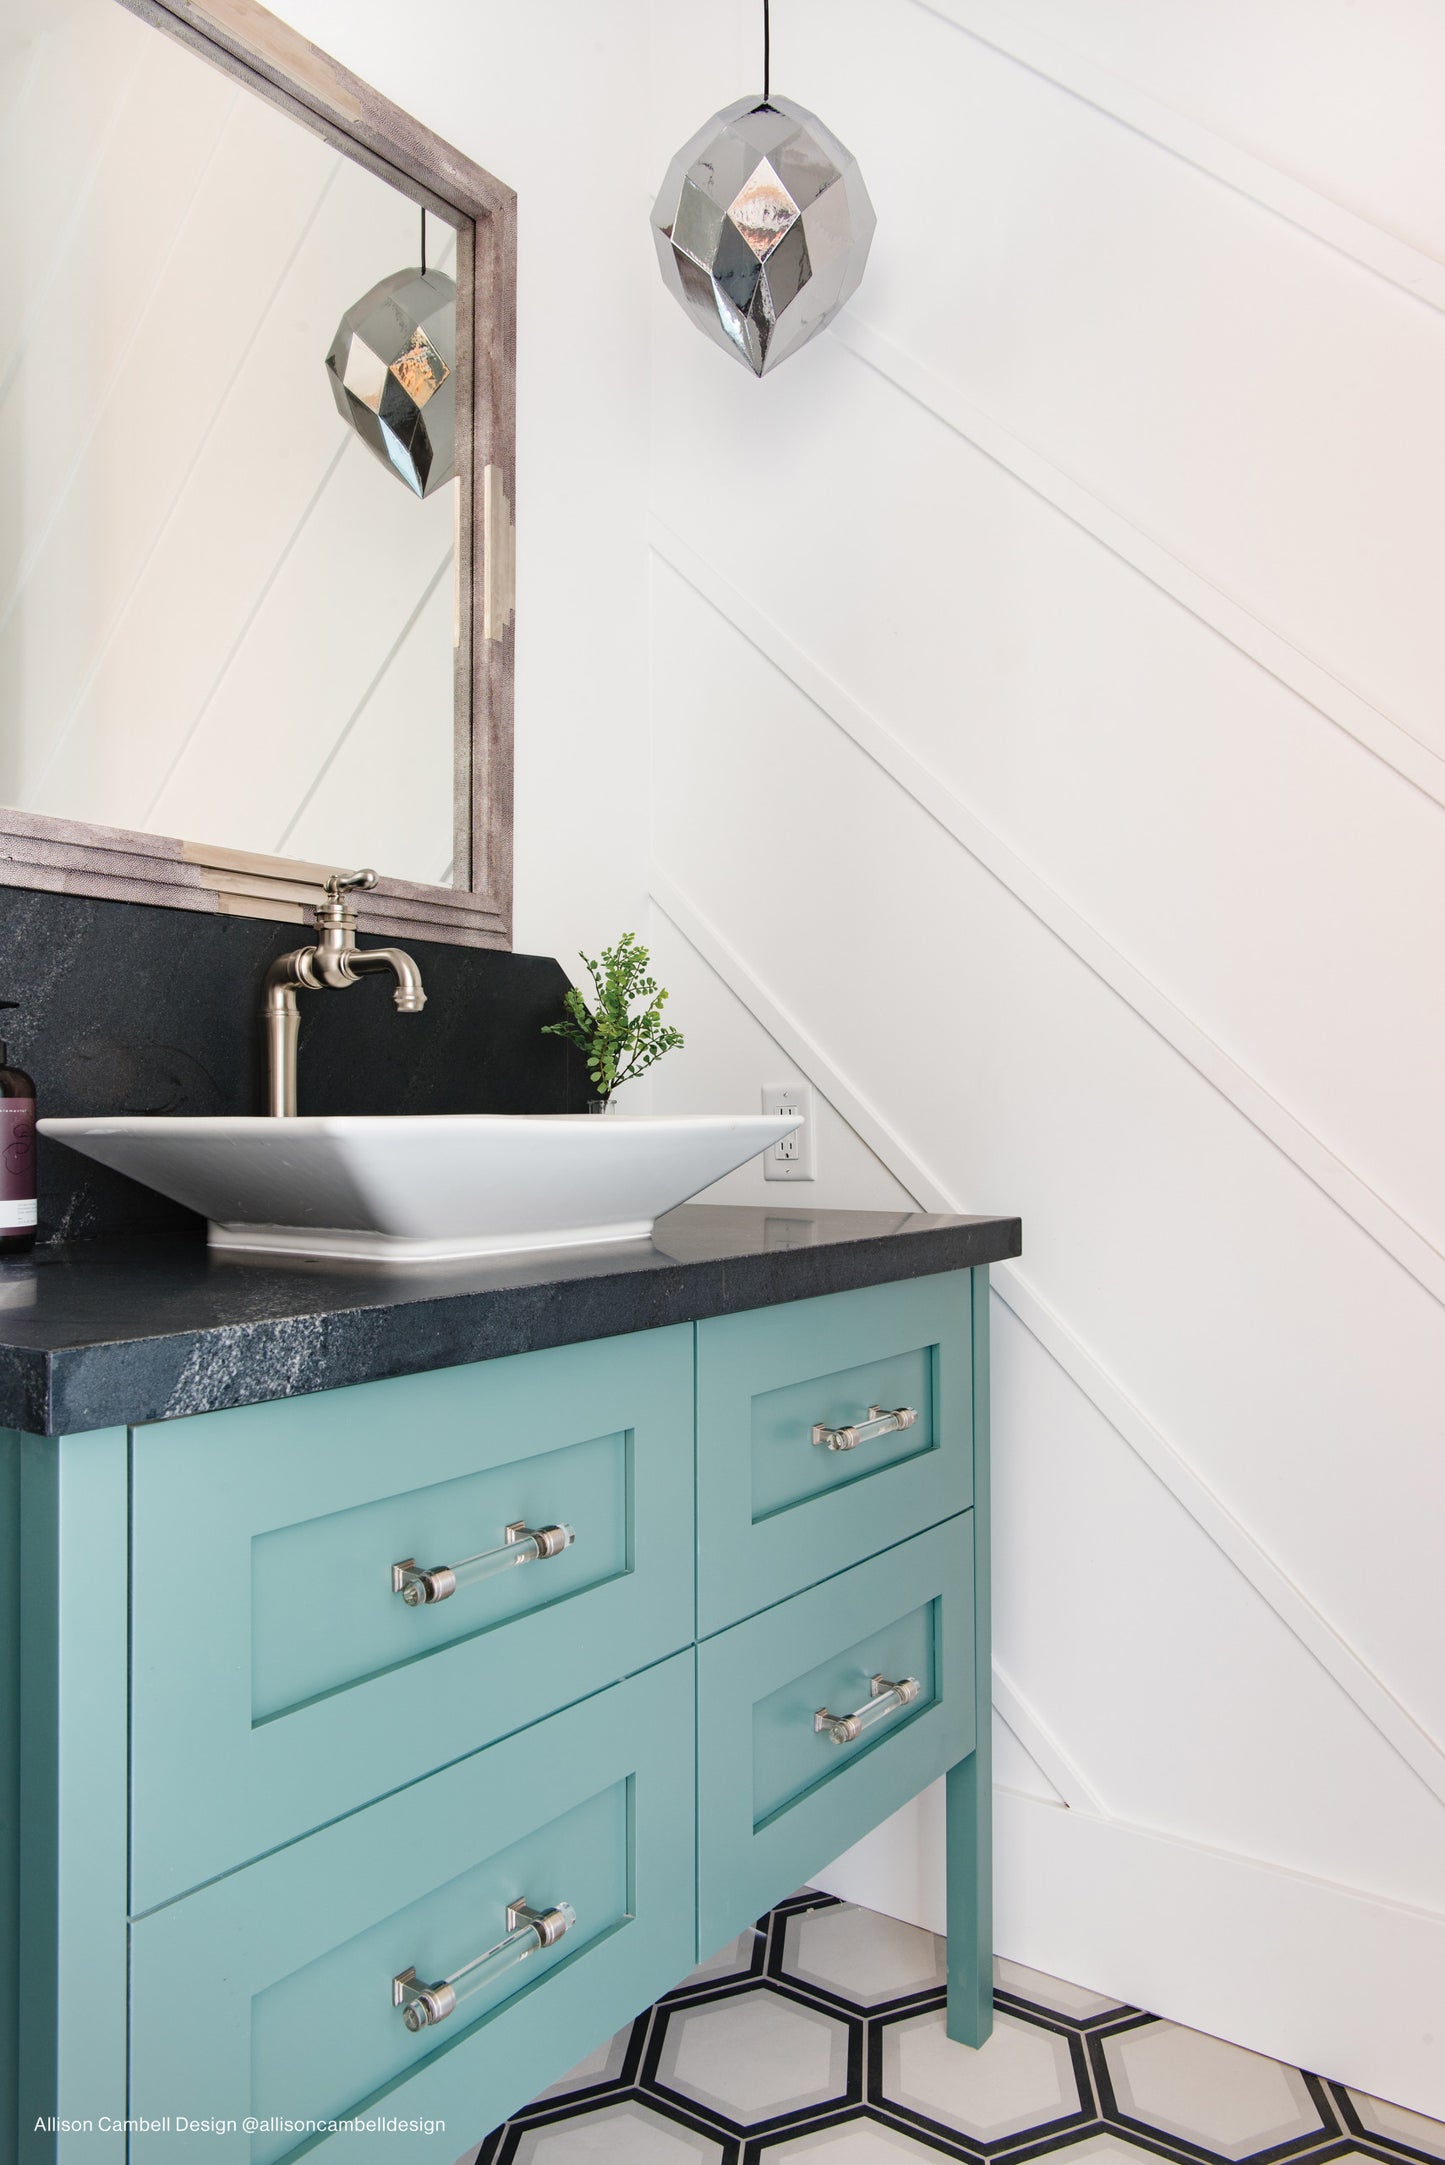 Example of Teliano hexagon decorative tile in a bold, modern bathroom with a teal vanity. 